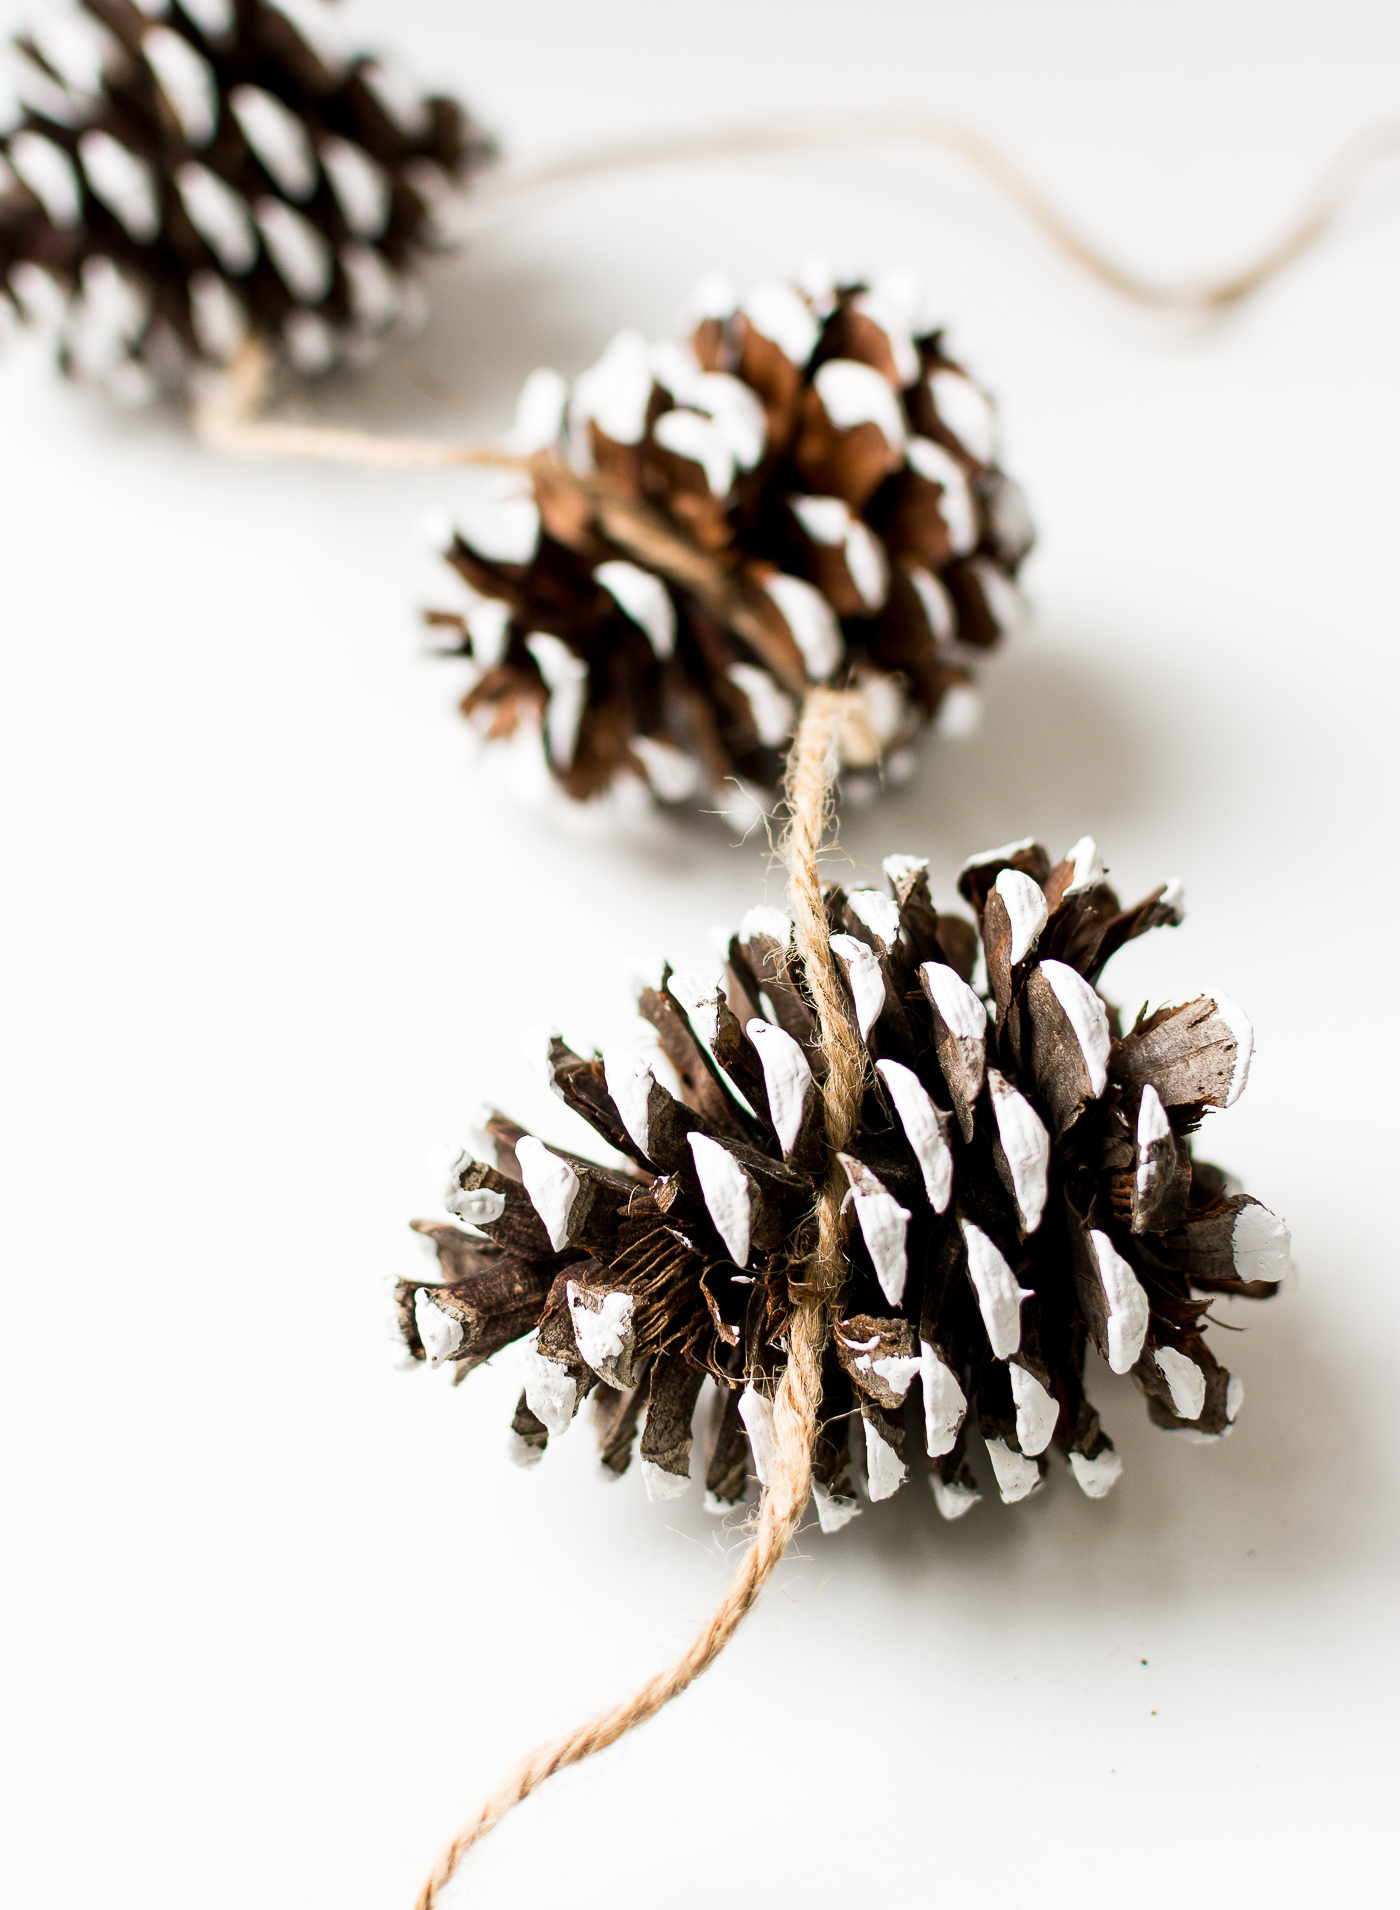 painted-pine-cones-how-to-paint-itallstartedwithpaint-com-9-1